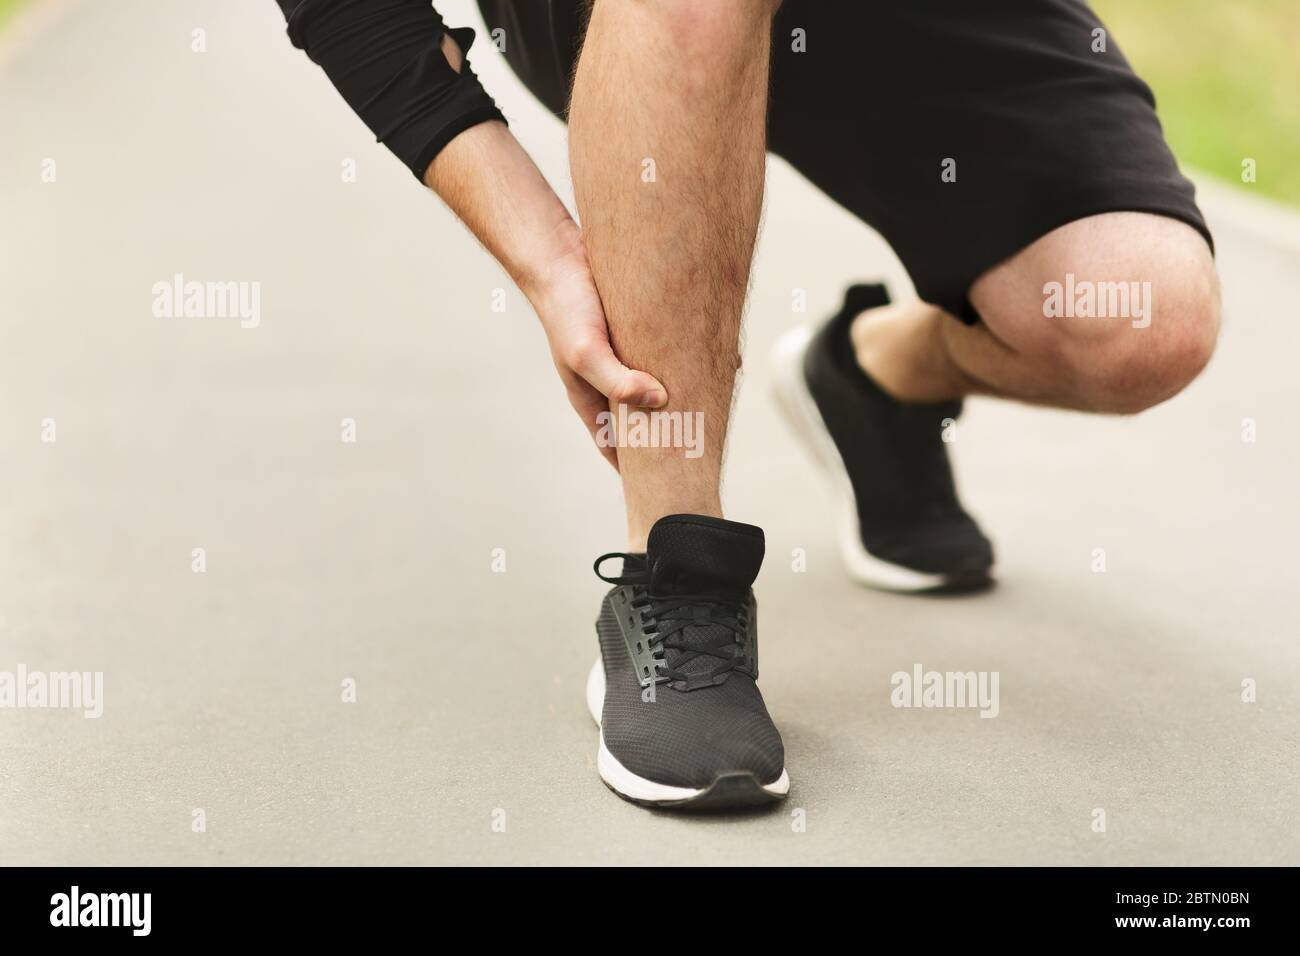 Calf sport muscle injury. Runner with muscle pain in leg Stock Photo